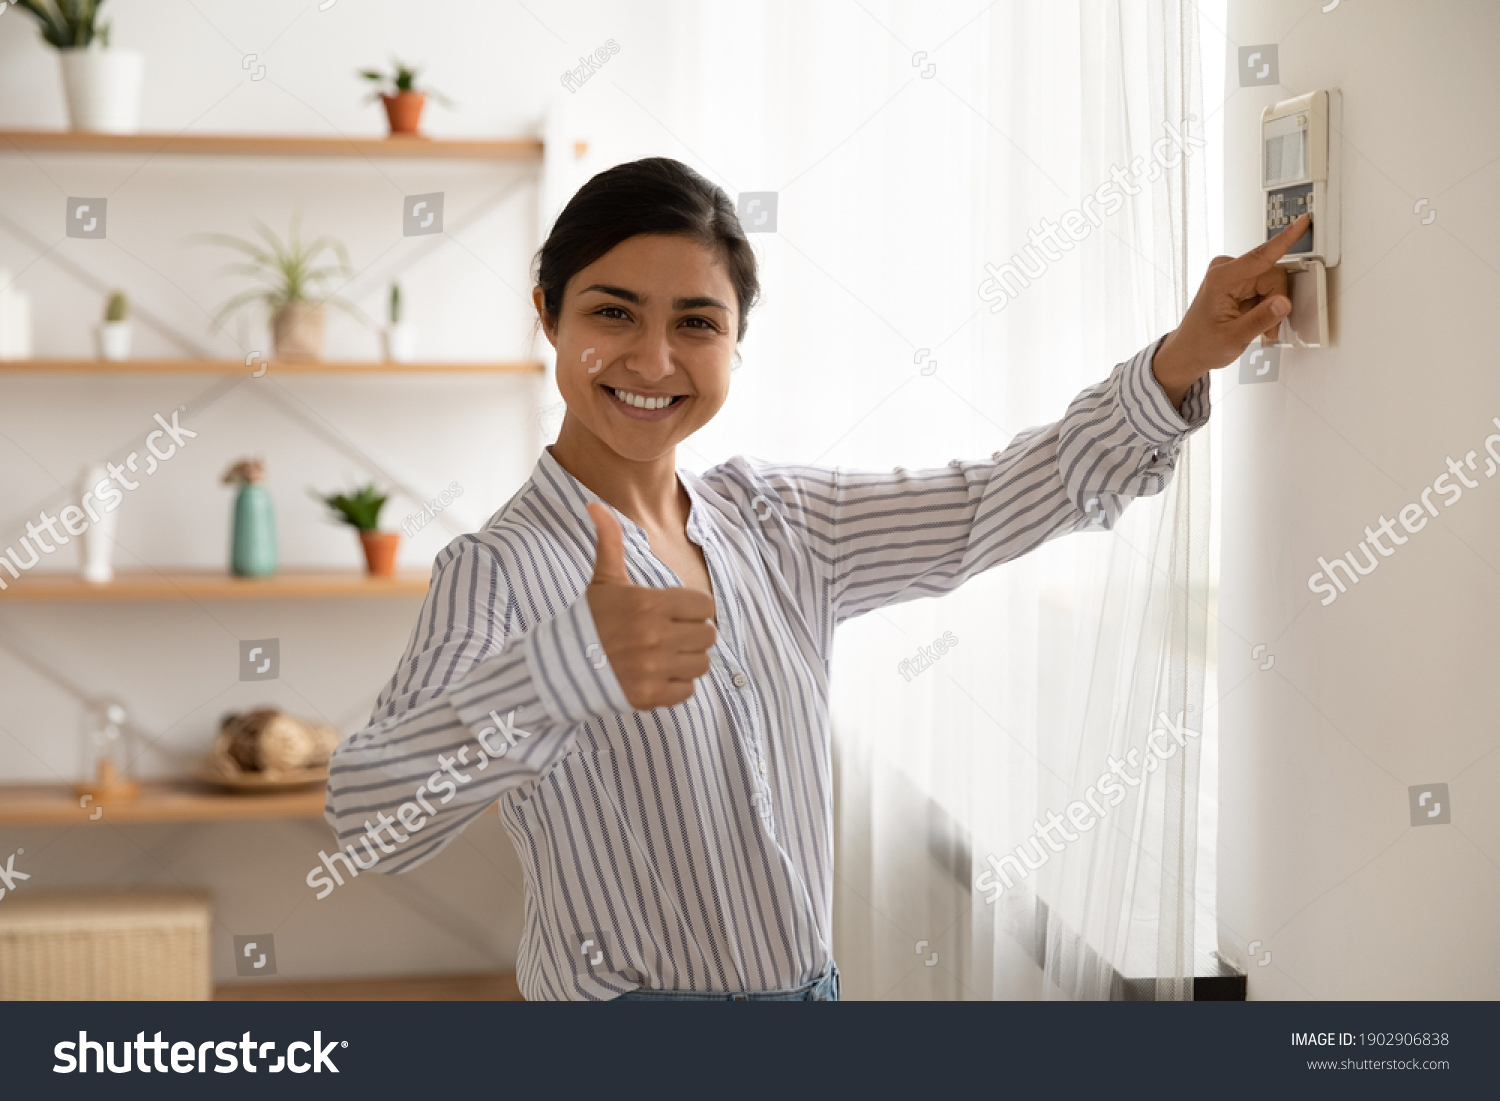 Portrait of smiling indian lady use domestic fire alarm system switch button on wall keypad show thumb up. Young female satisfied user of home security equipment look at camera trust recommend safety #1902906838